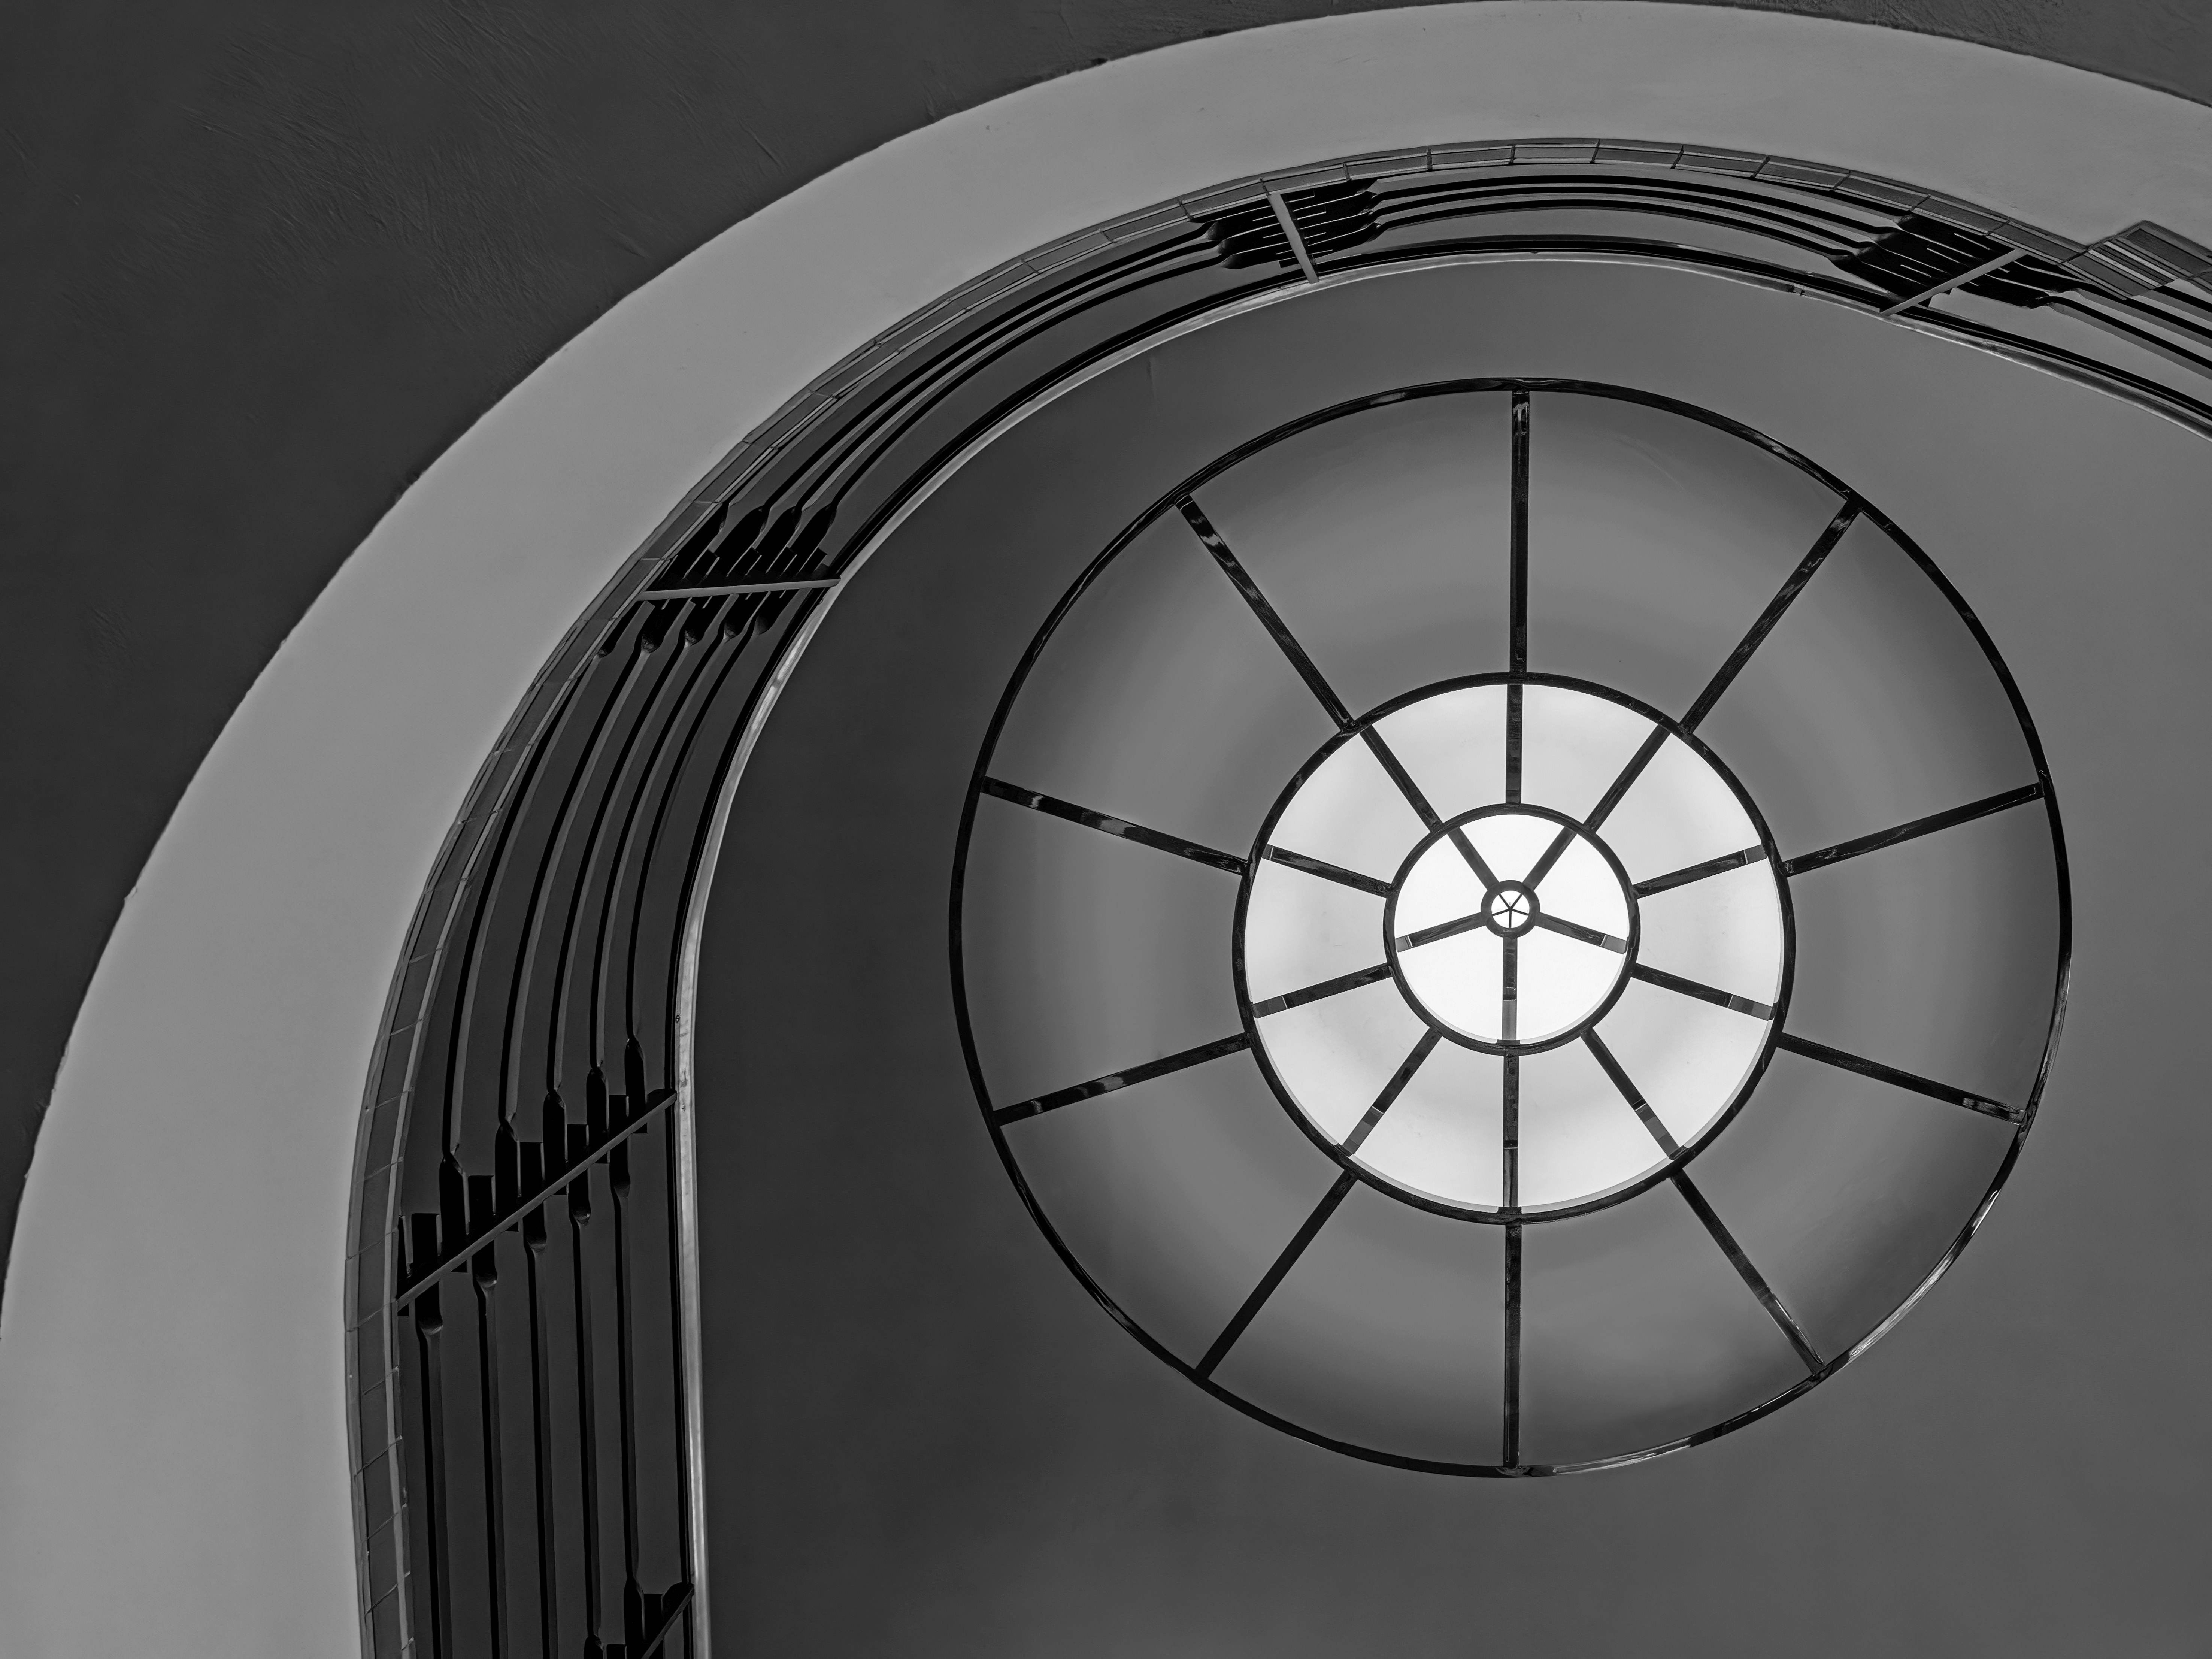 STAIRCASE by Peter Hornbostel